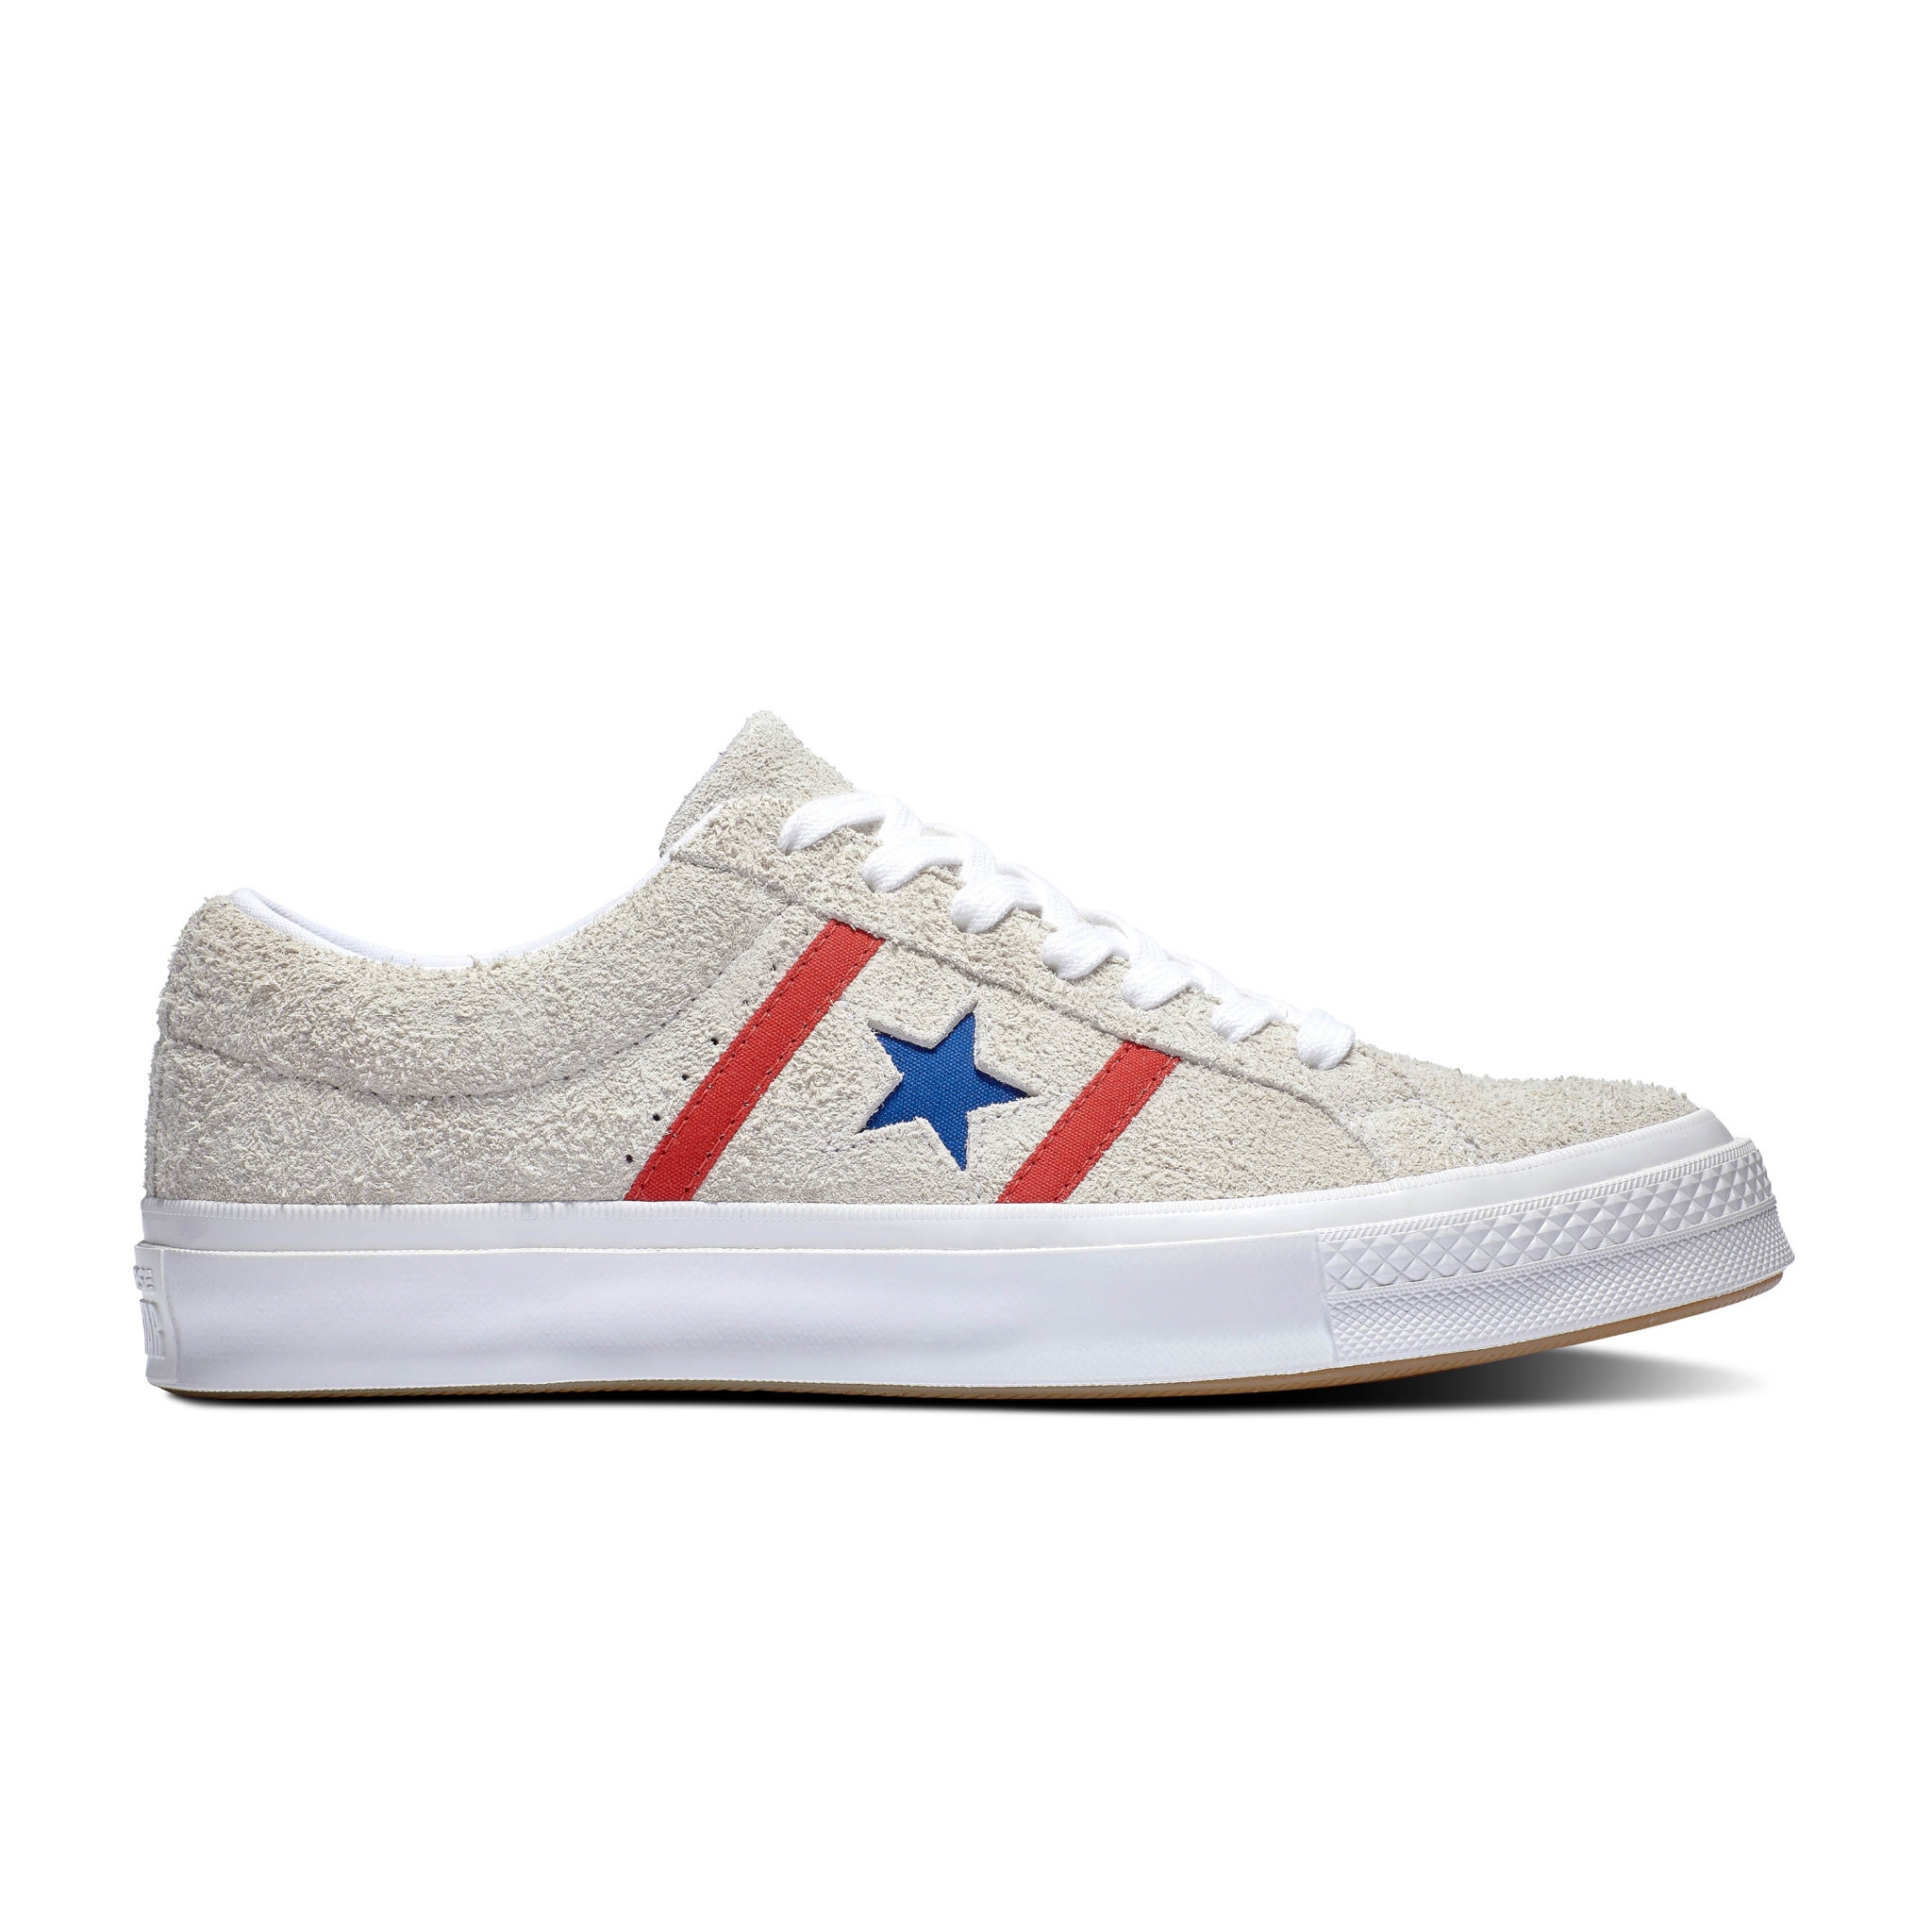 converse one star suede white